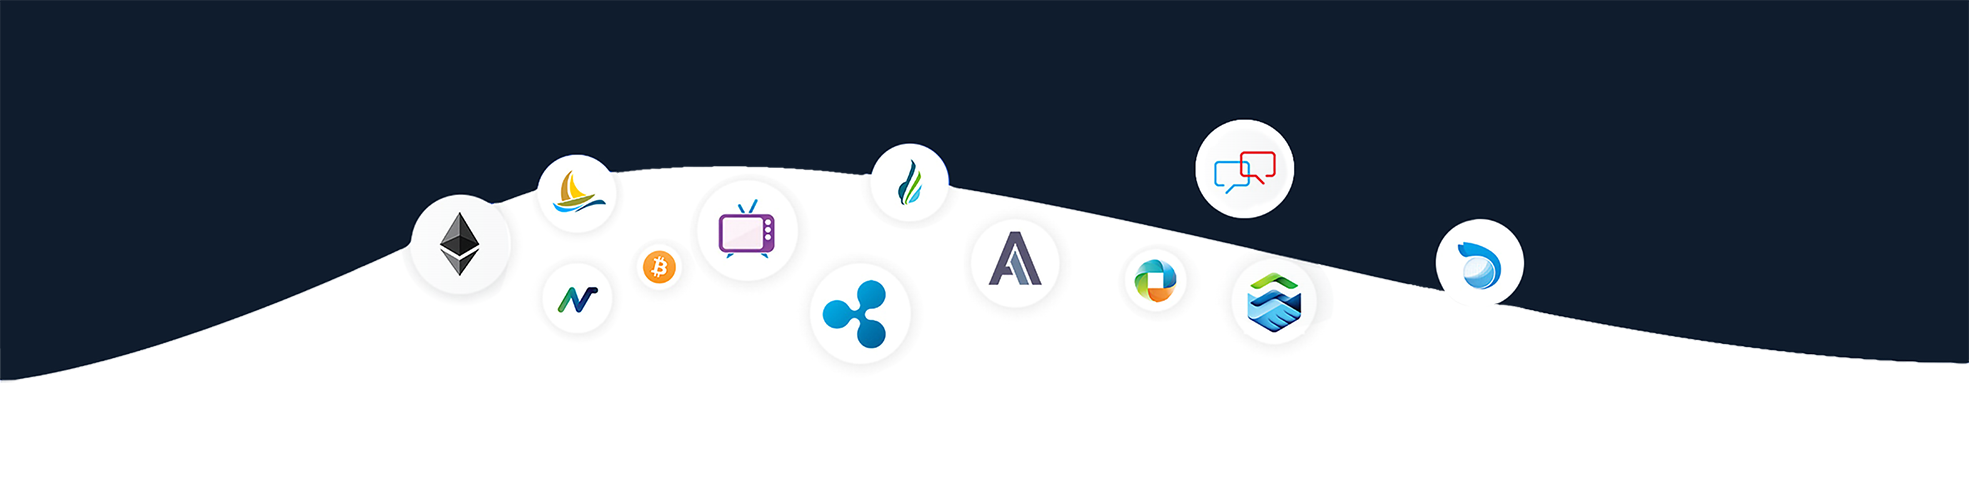 Top page of website with cryptocurrencies icons